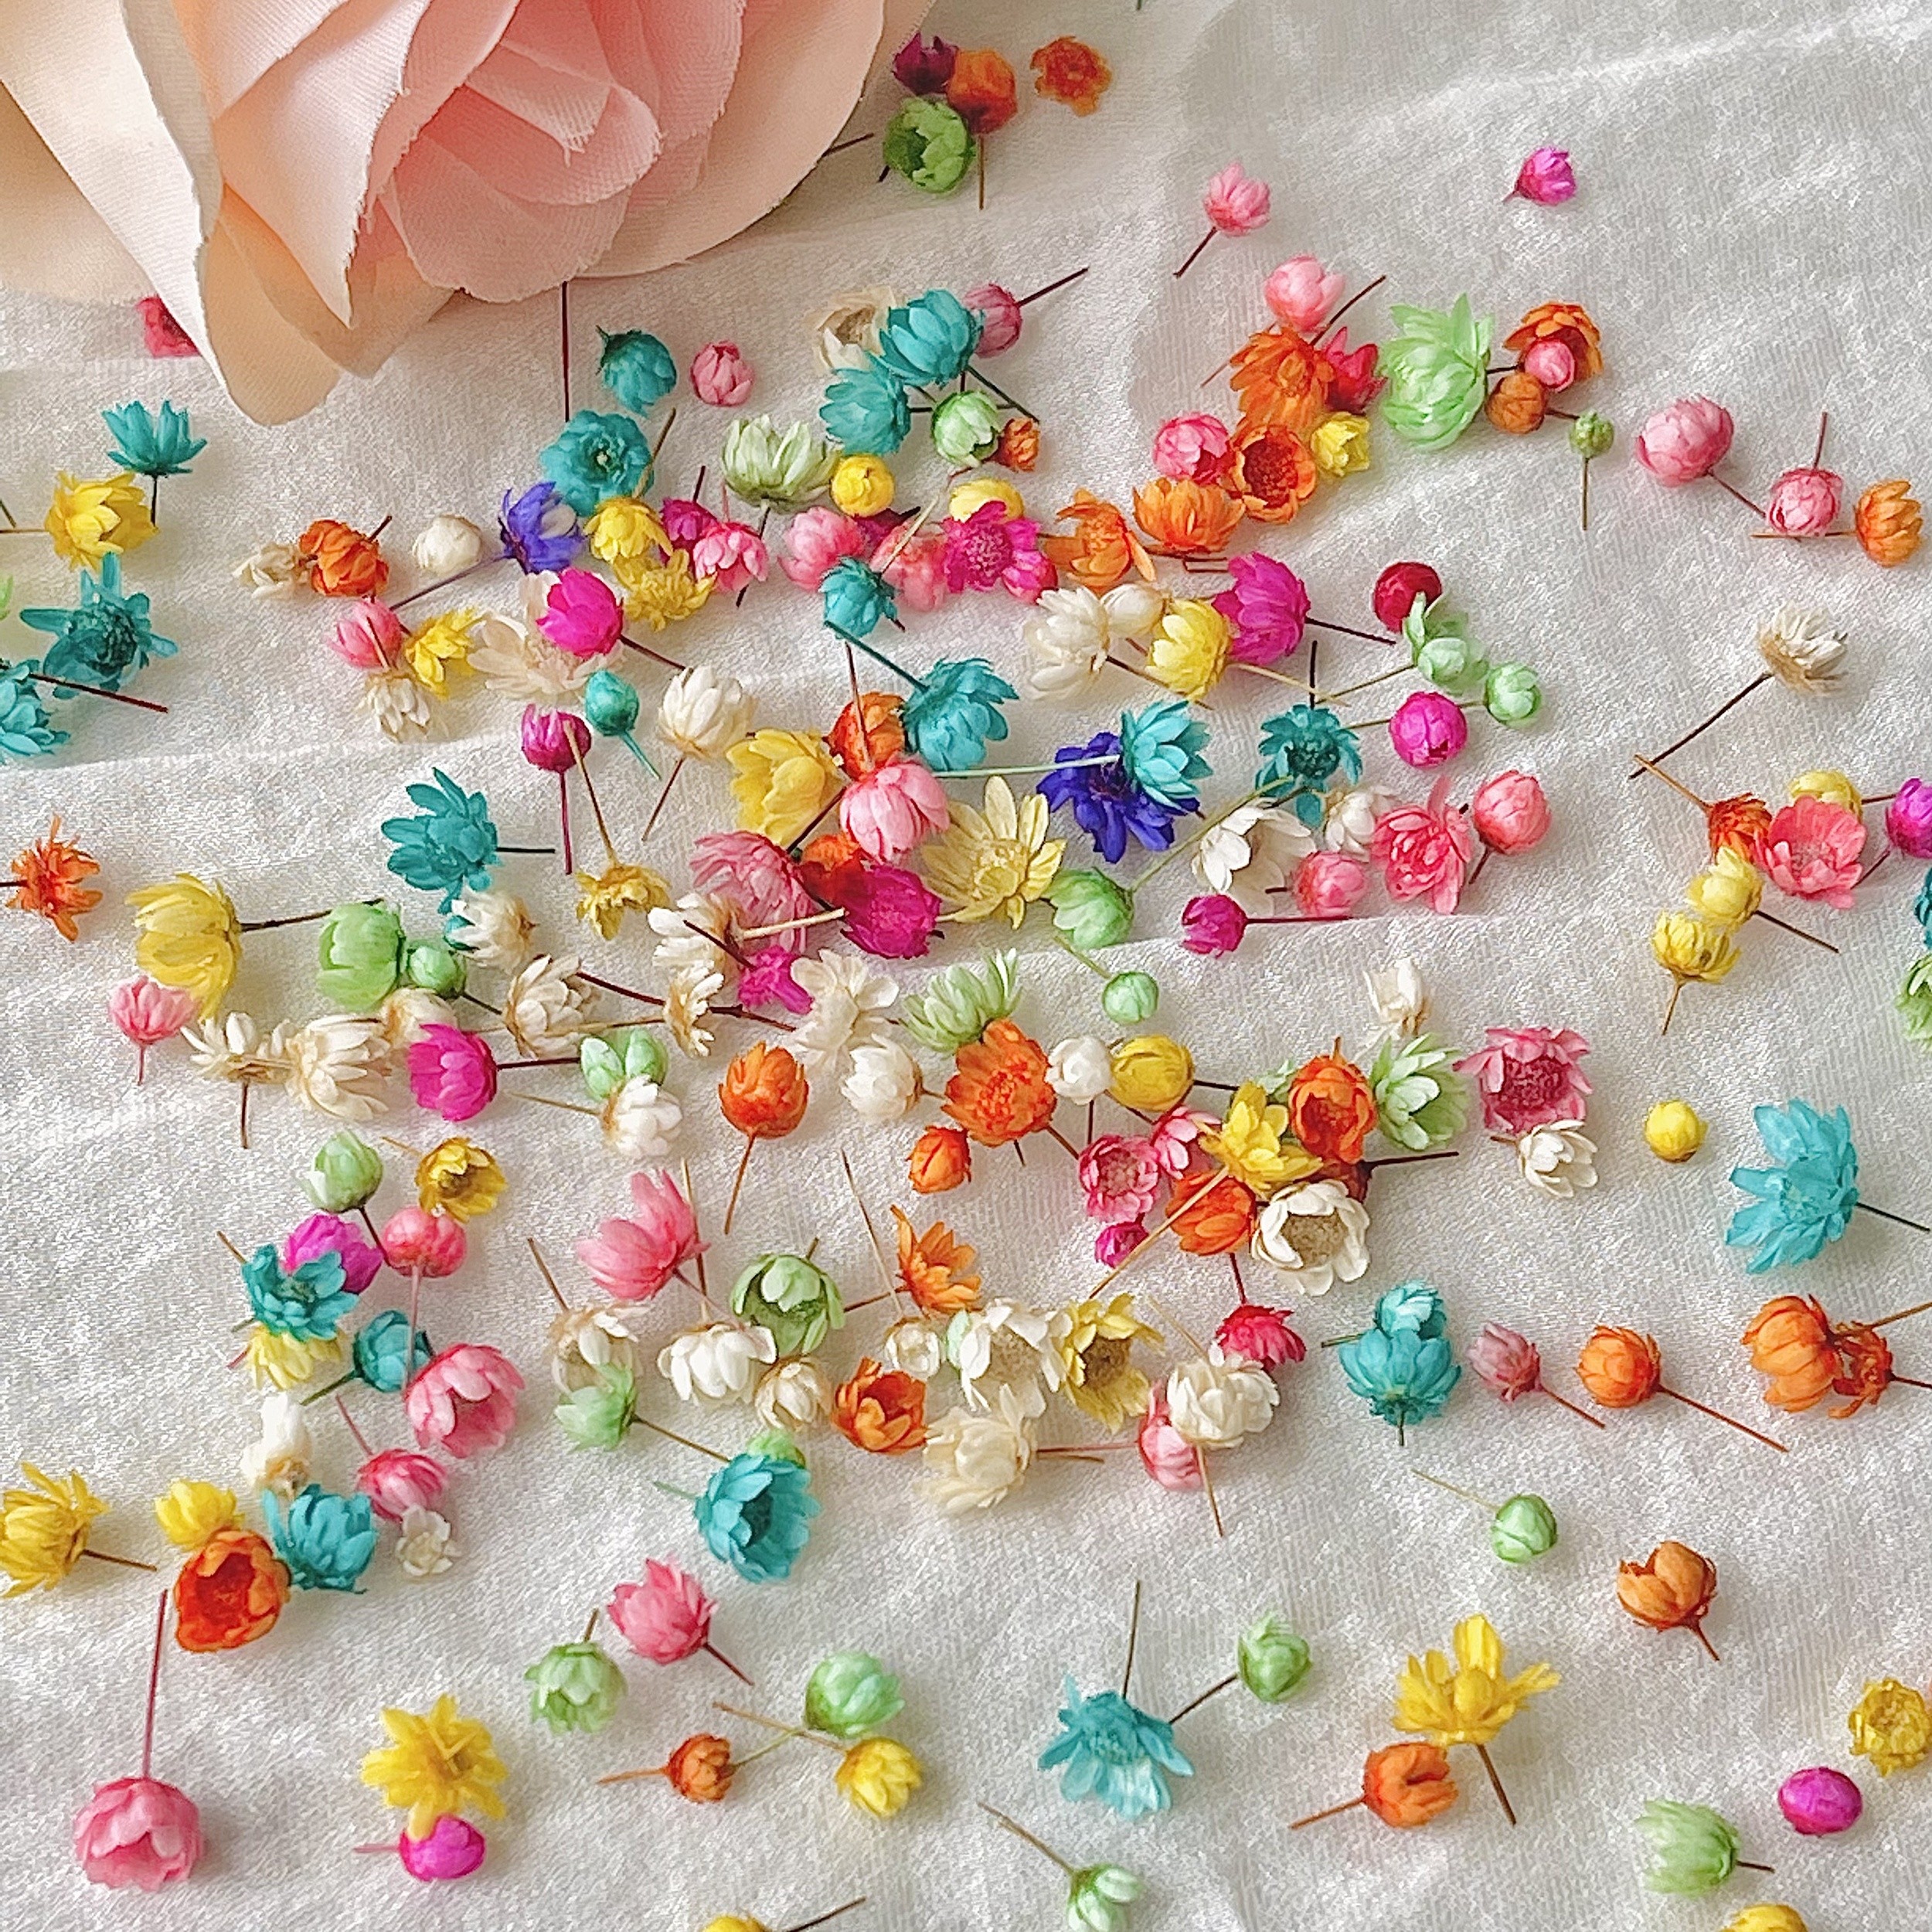 Pressed Flowers, Pressed Flowers for Resin, Small Flowers for